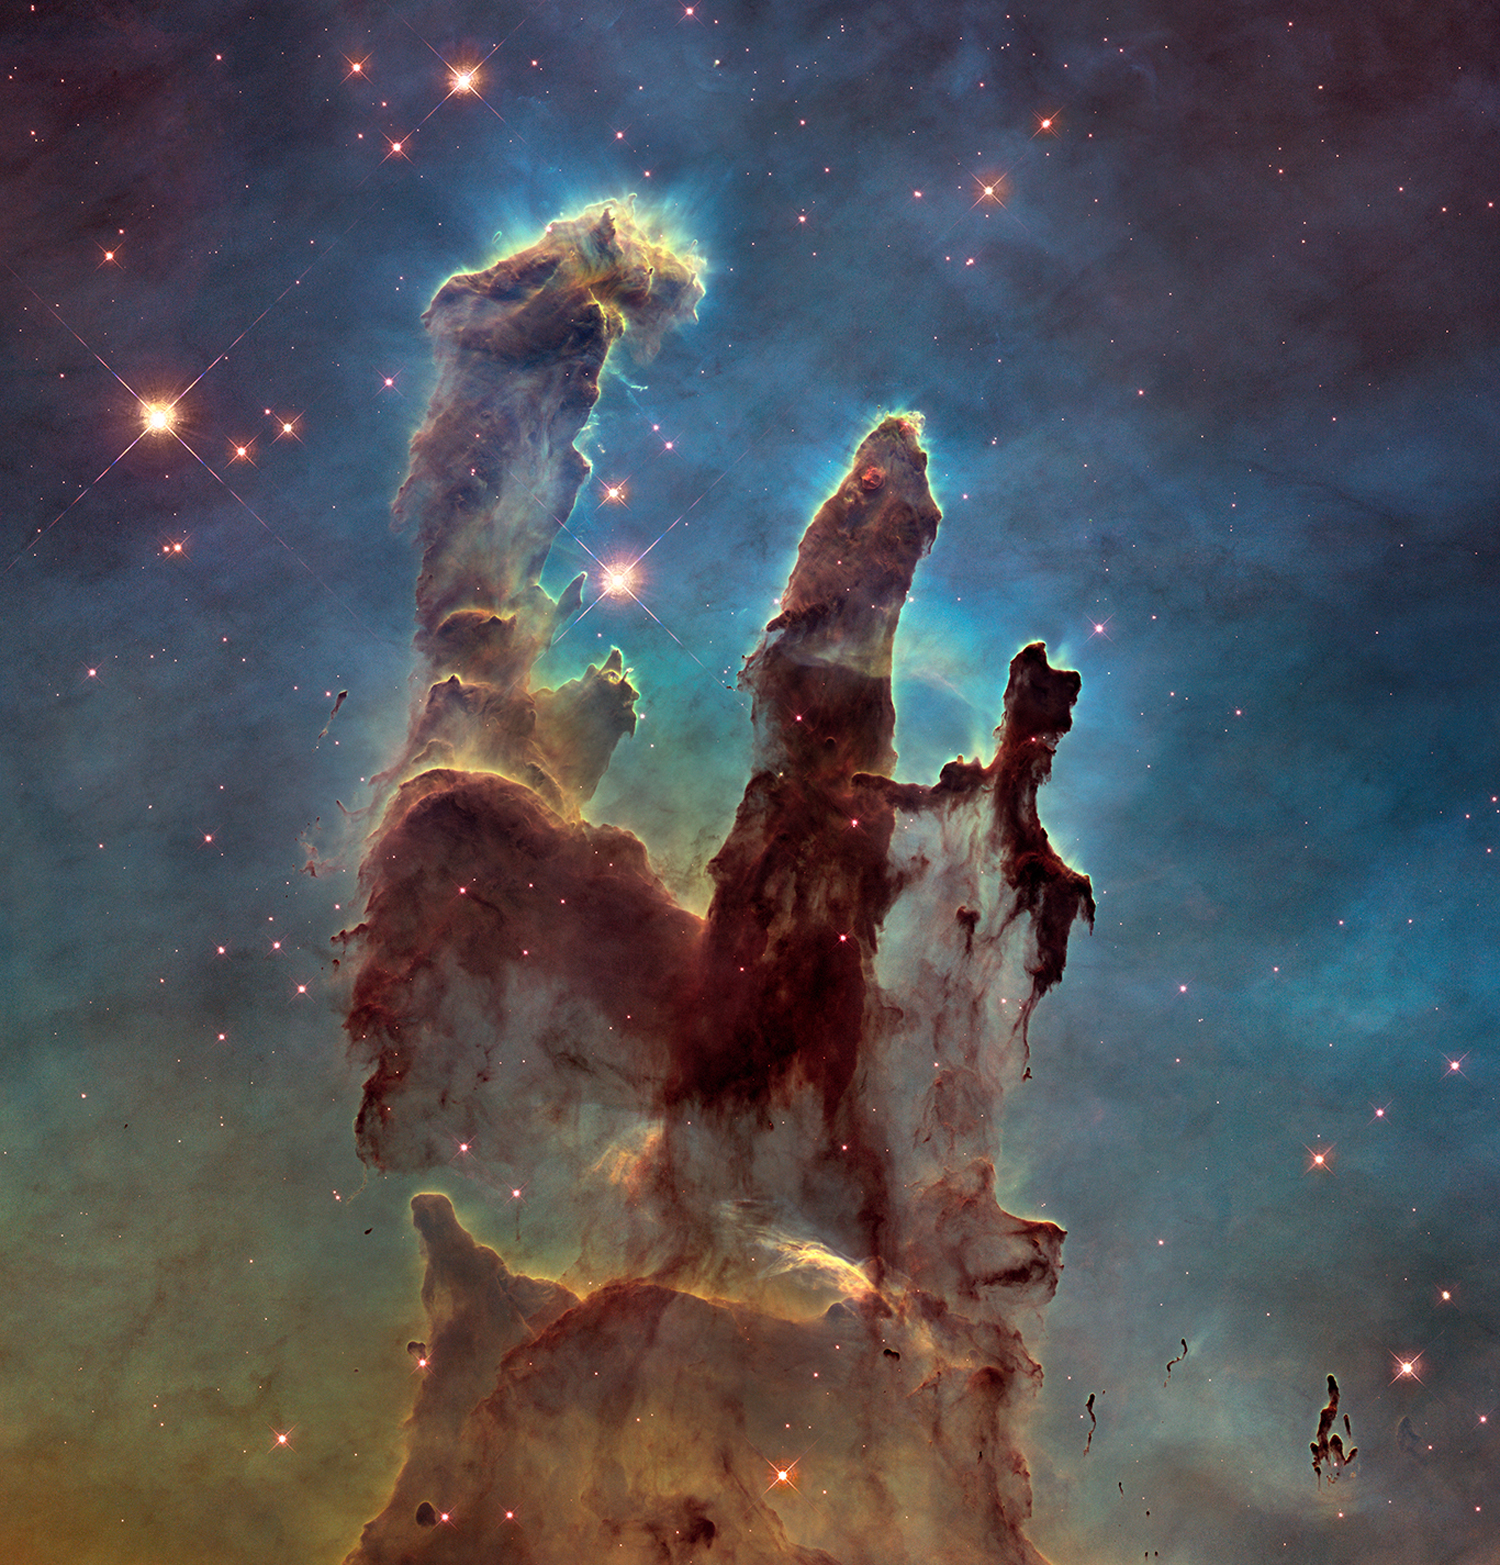 New stars are born in these towers of gas and dust, called the Pillars of Creation, in the Eagle Nebula. This is an iconic image and one of our best space shots of all time.